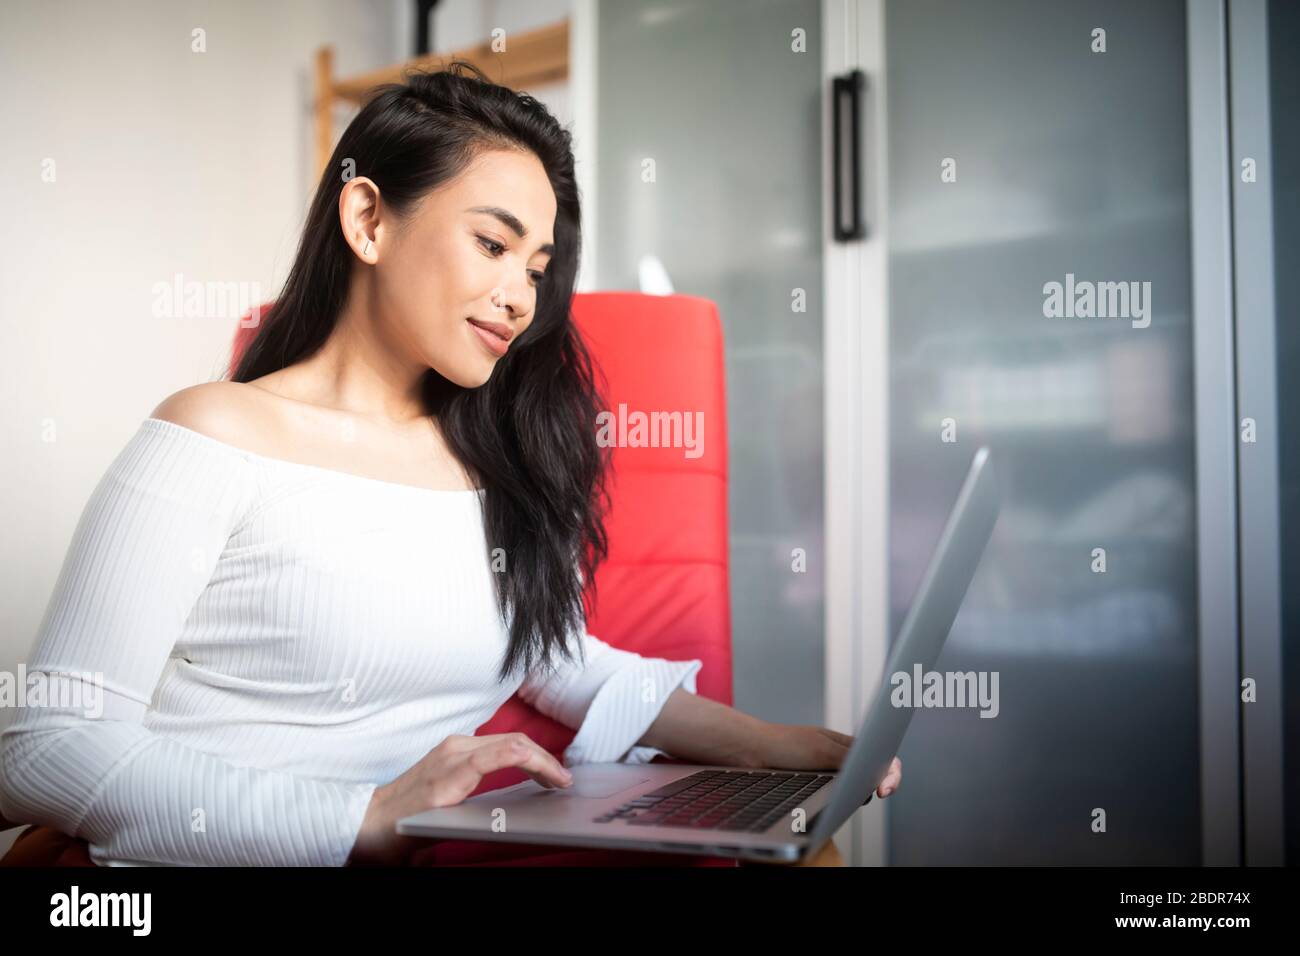 Beautiful young woman working from home with a laptop computer on her laps Stock Photo